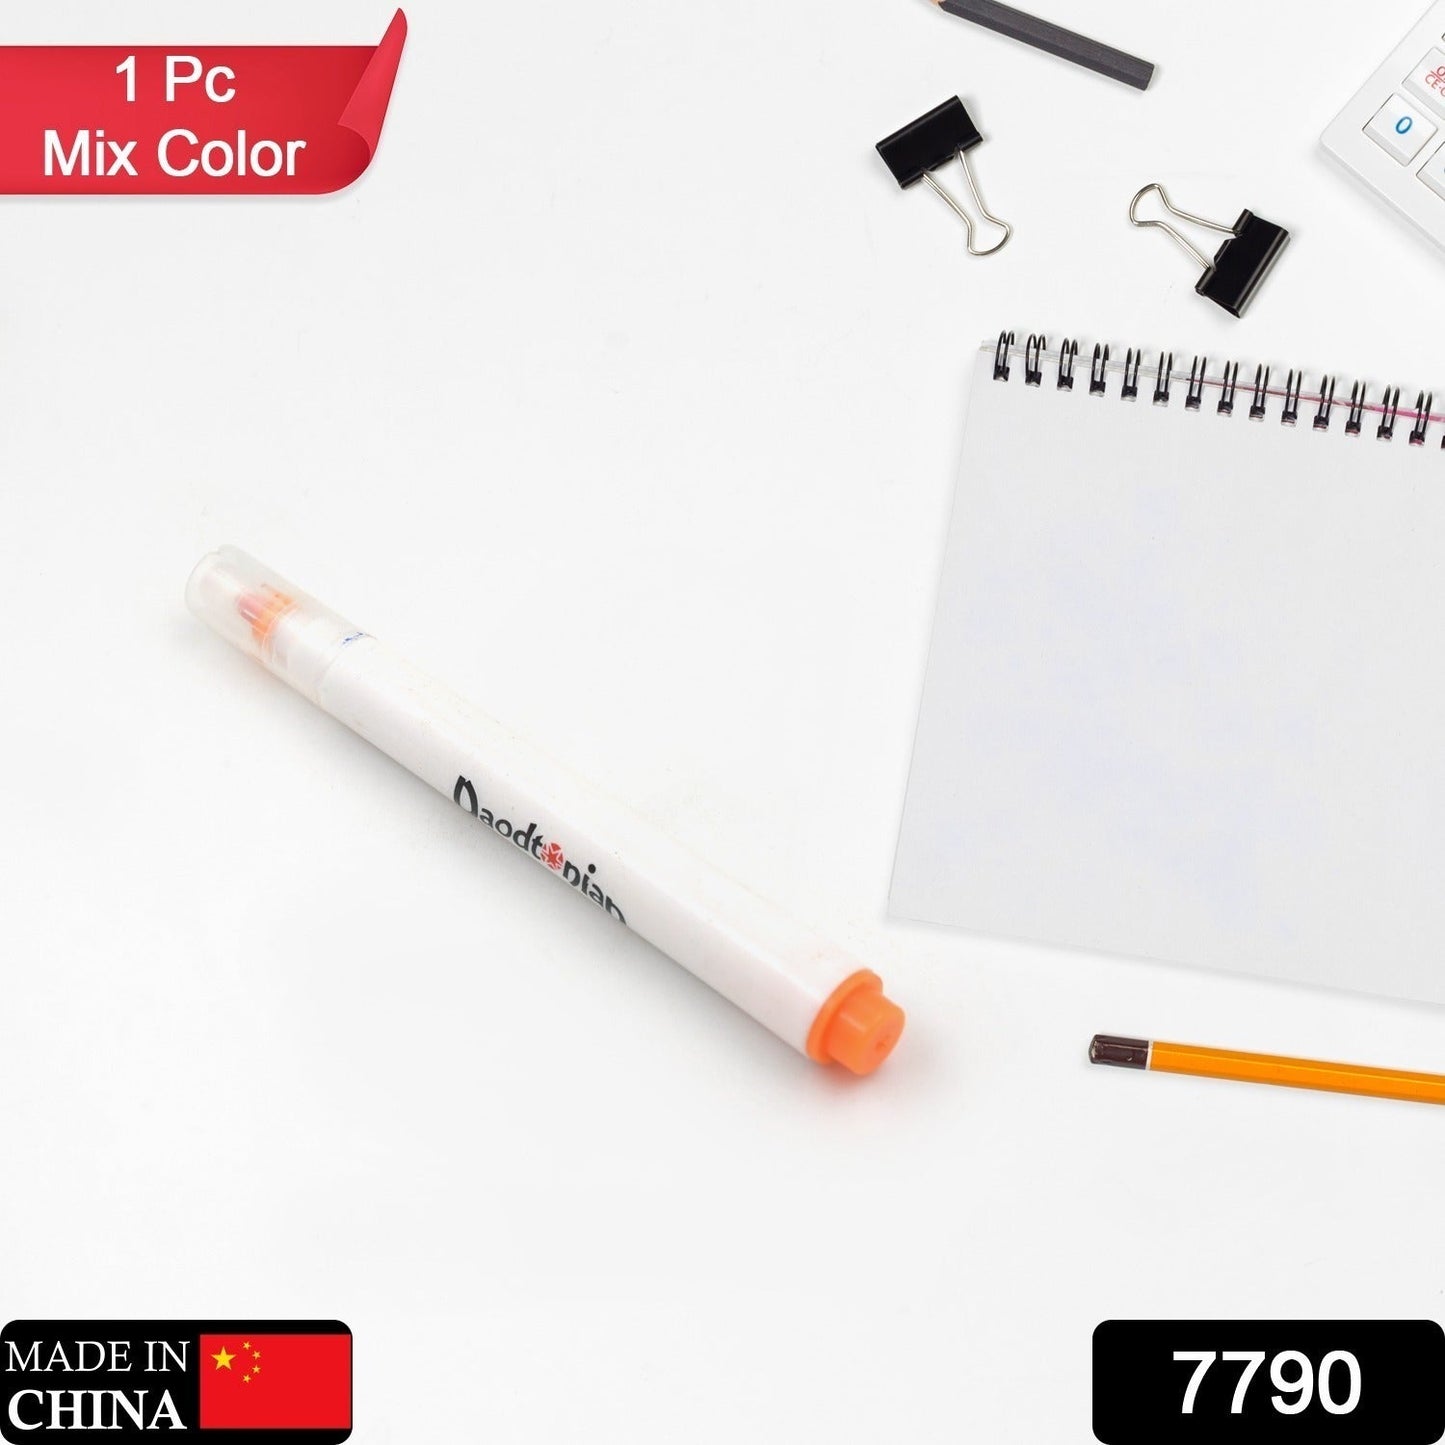 7790 Mix Color Marker Pen Fancy Art Markers, Art Markers For Painting, Coloring, Sketching And Drawing For Kids & Adult (1 Pc)